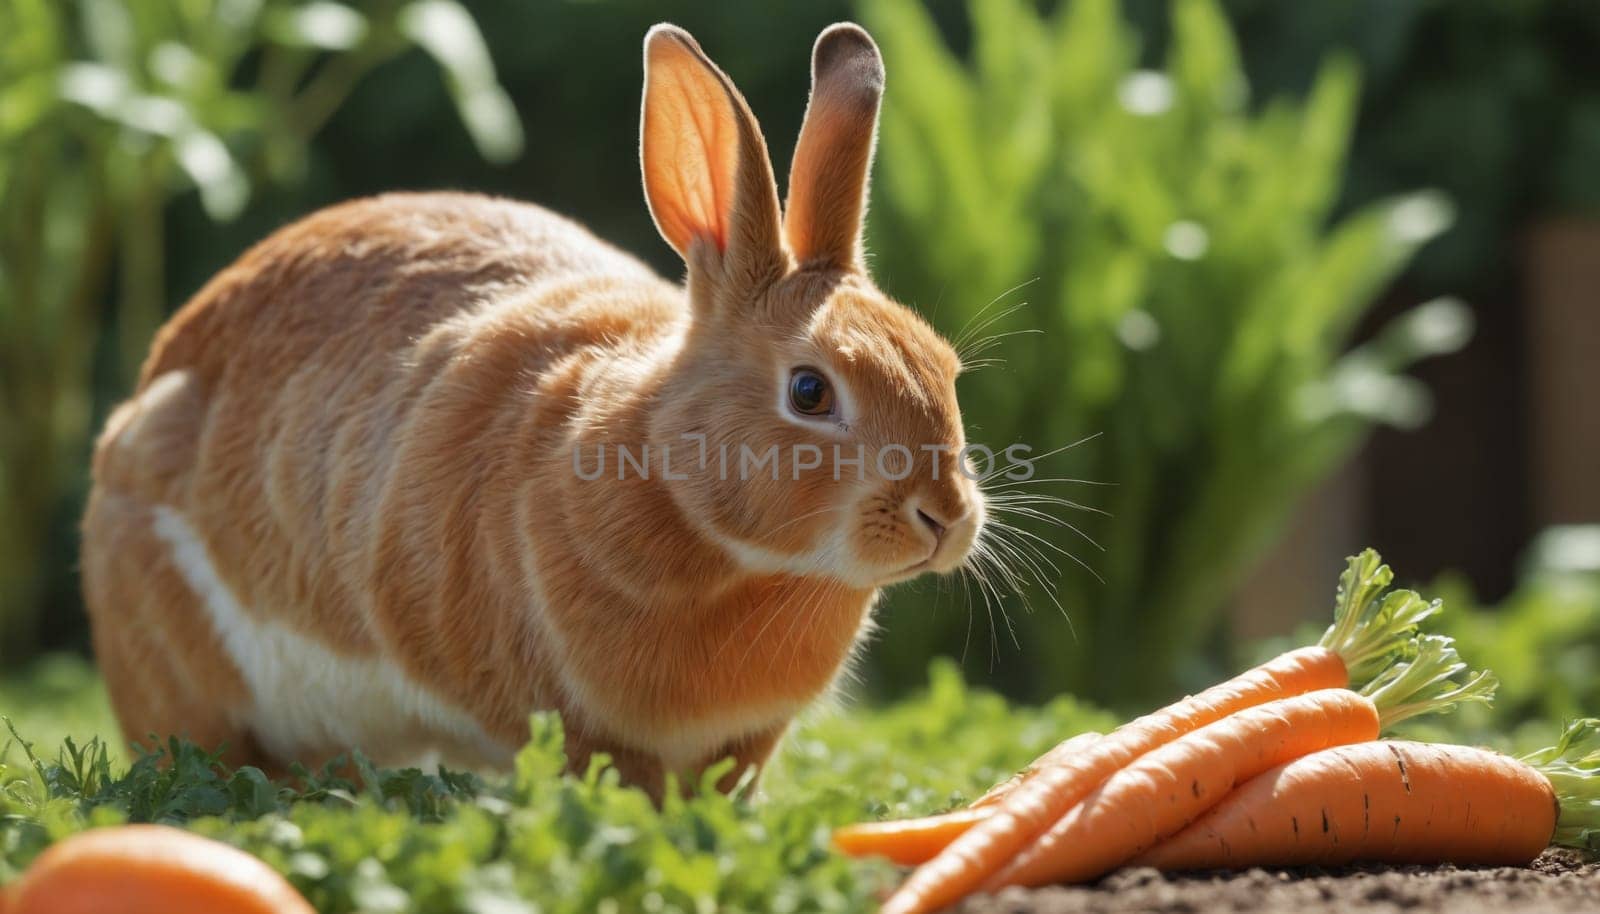 A fluffy, orange and white rabbit stands in a vibrant green garden, its long ears perked up and its eyes fixed on a pile of bright orange carrots. The rabbit's white fur contrasts beautifully with its orange coat, and the background is a blur of green foliage, creating a serene and inviting atmosphere.